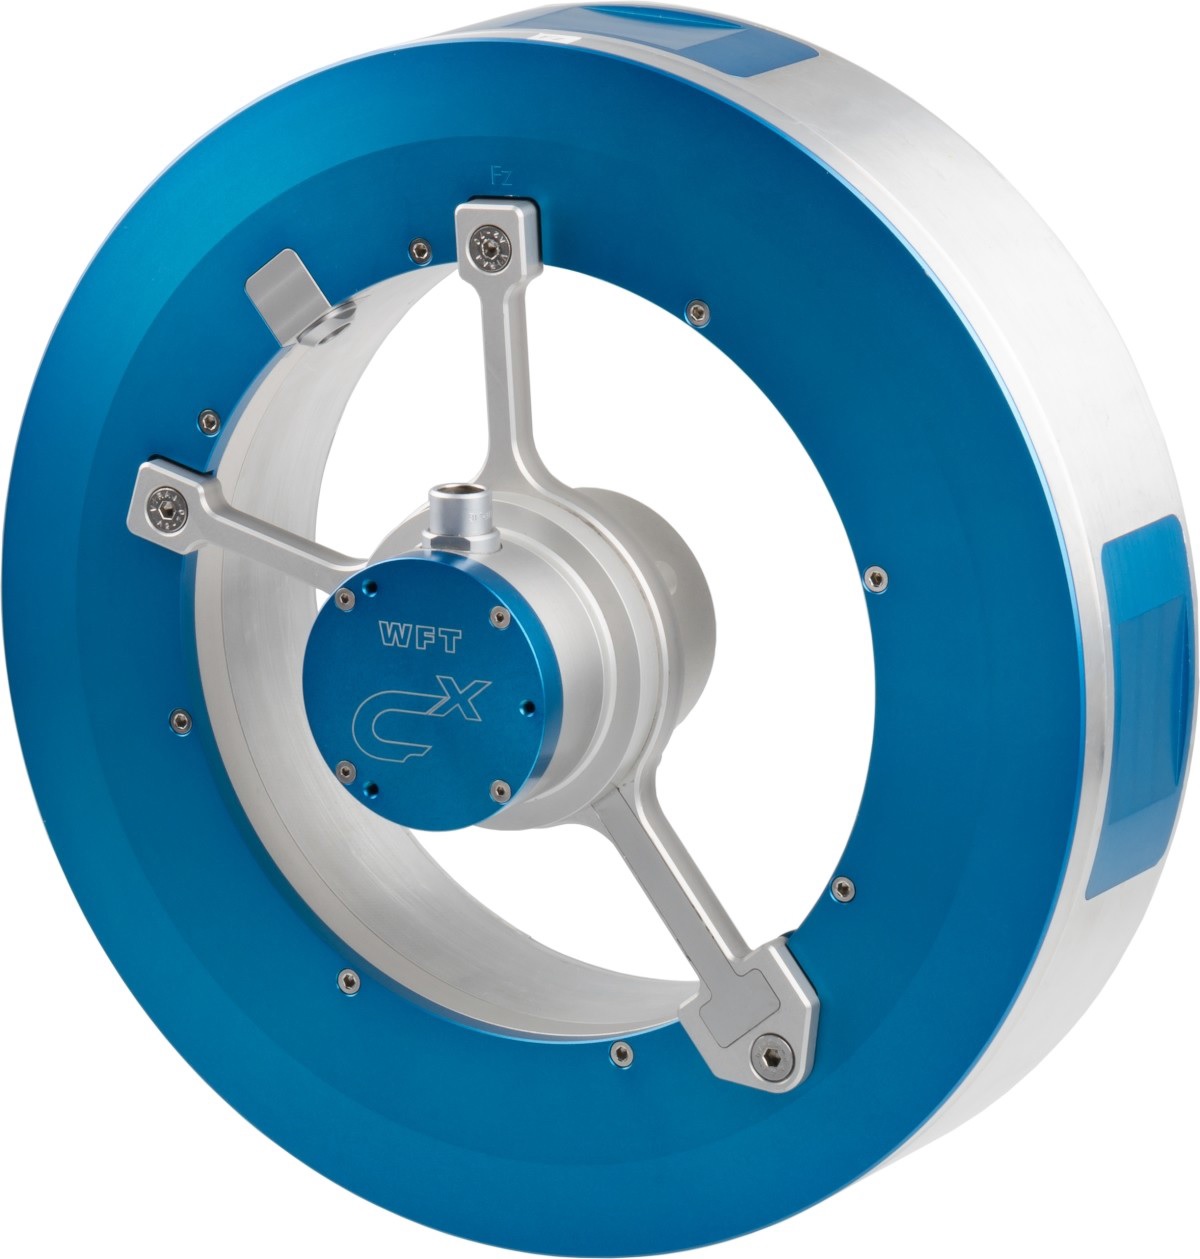 WFT-C - 6-Component Wheel Force Transducers